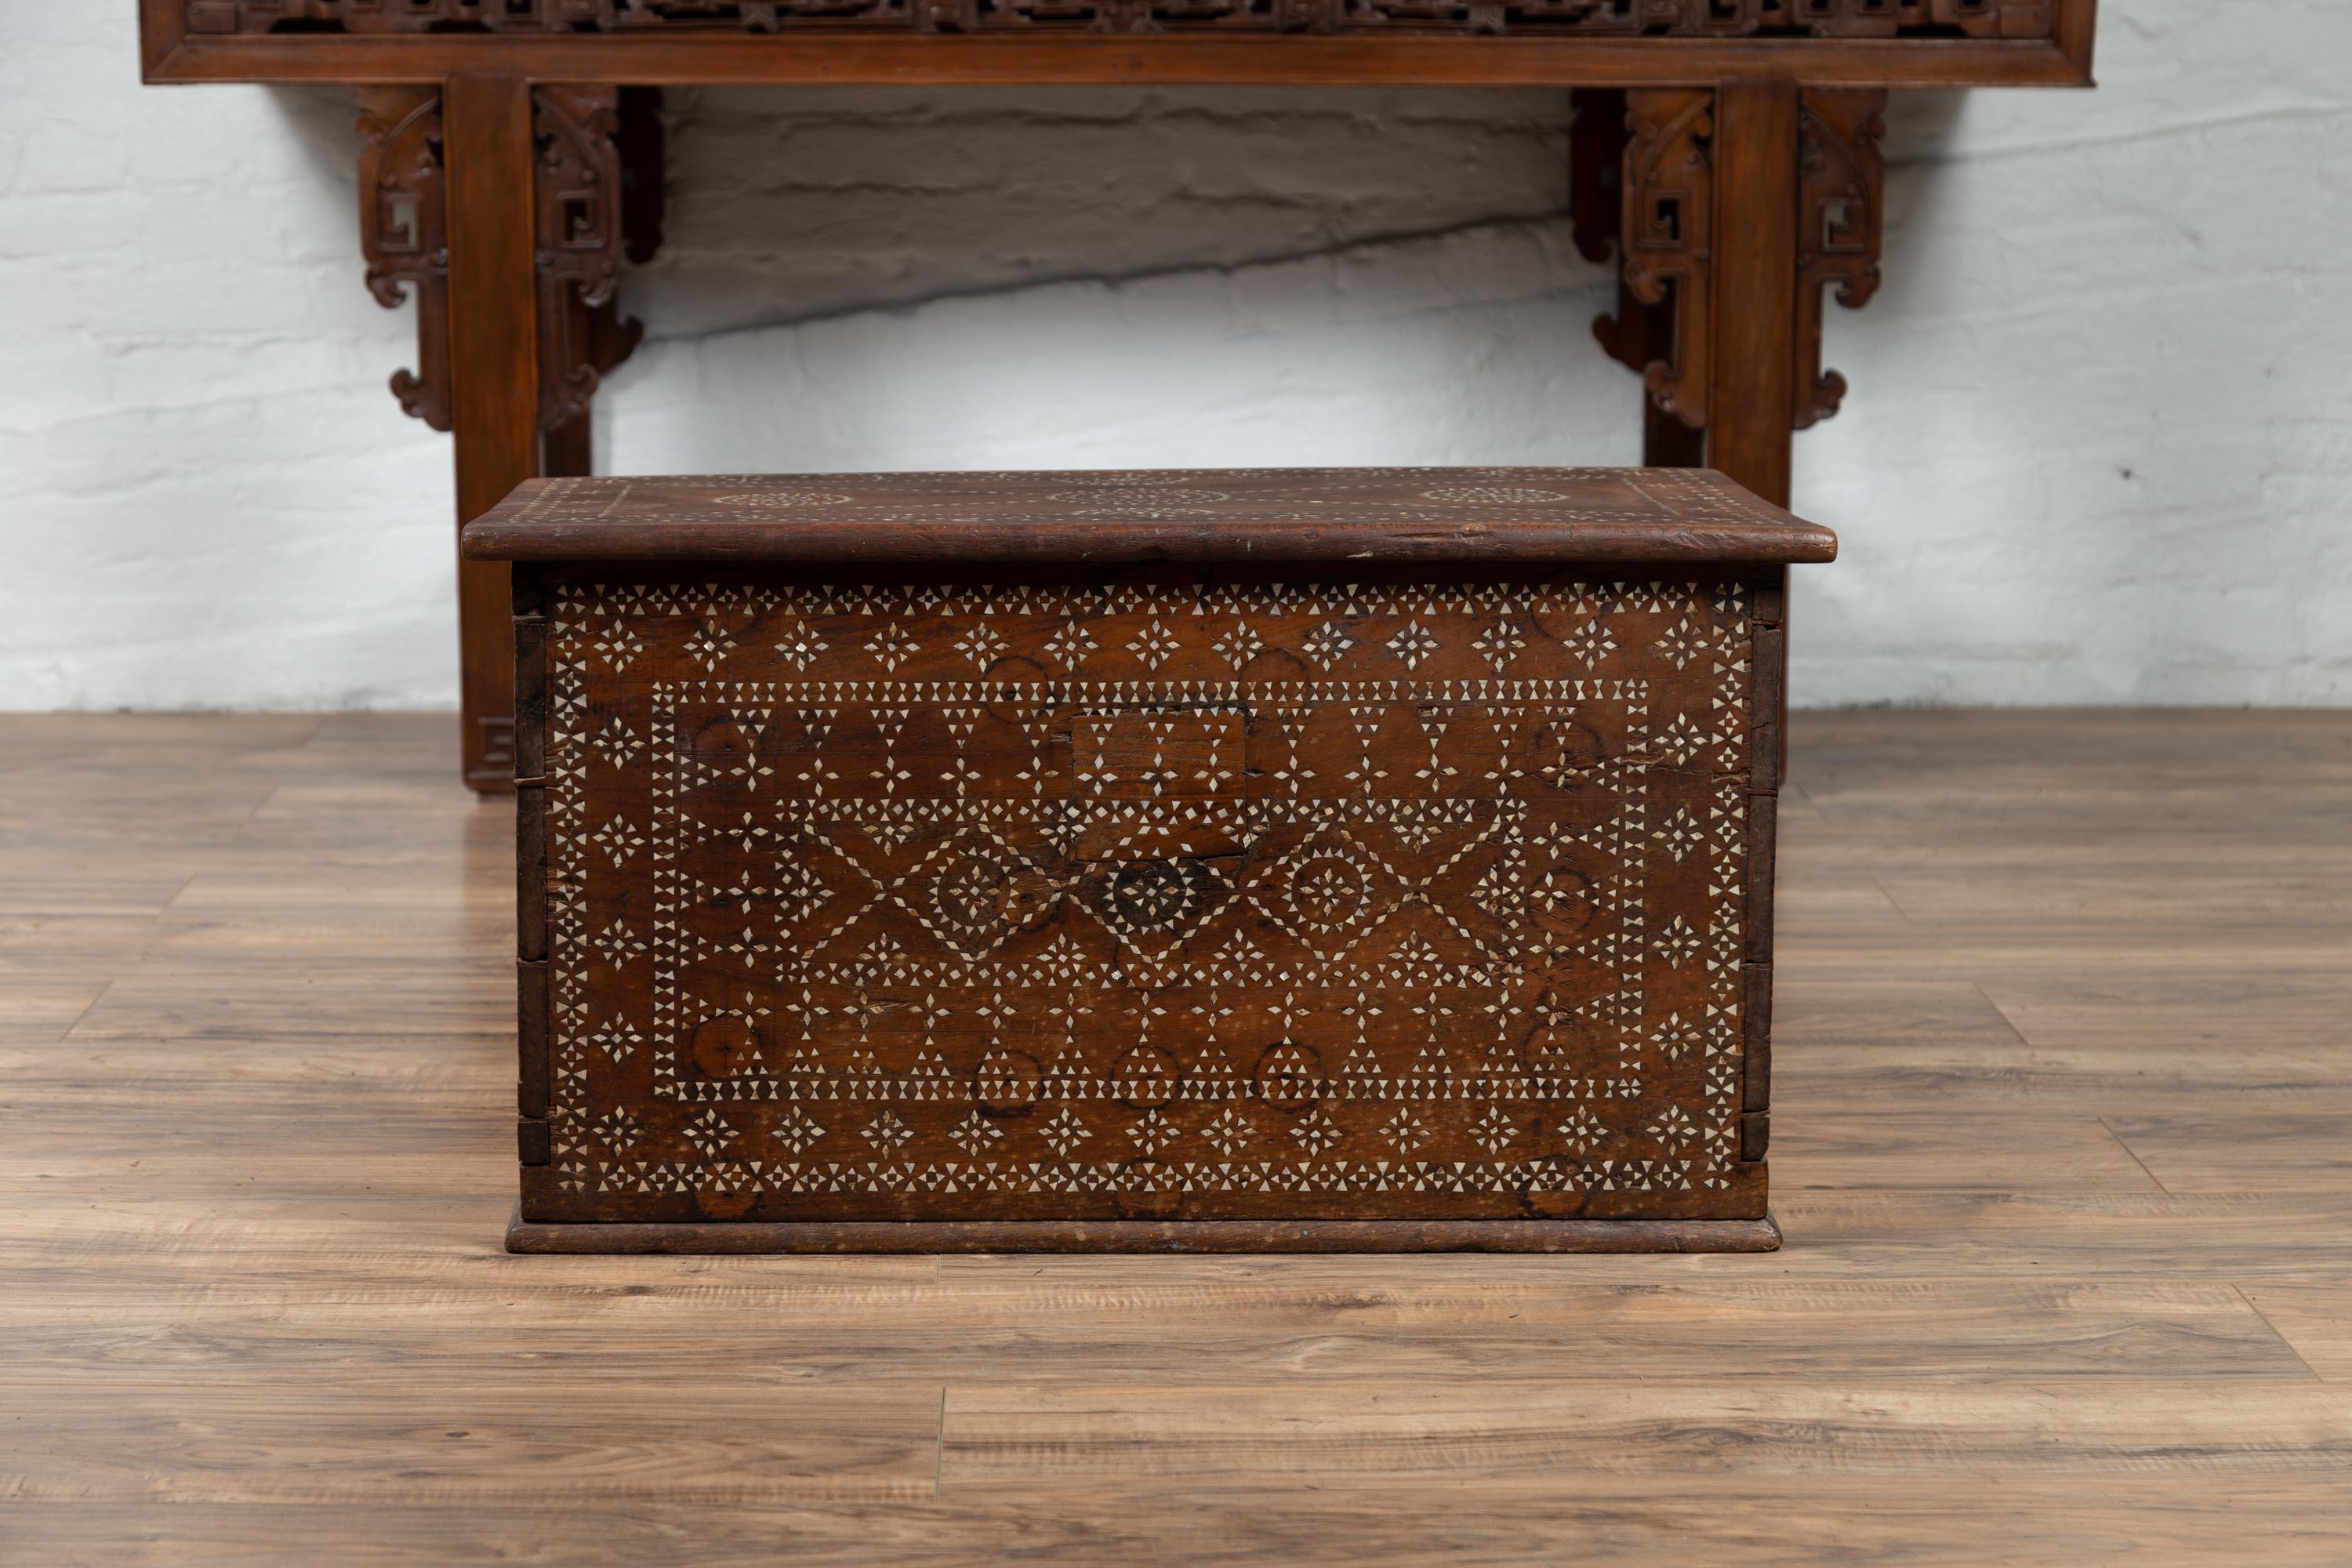 An Indonesian wooden blanket chest from Madura, adorned with mother-of-pearl inlay. Born on the island of Madura off of the northeastern coast of Java, this charming blanket chest features a rectangular lid sitting above a rectangular body. Adorned